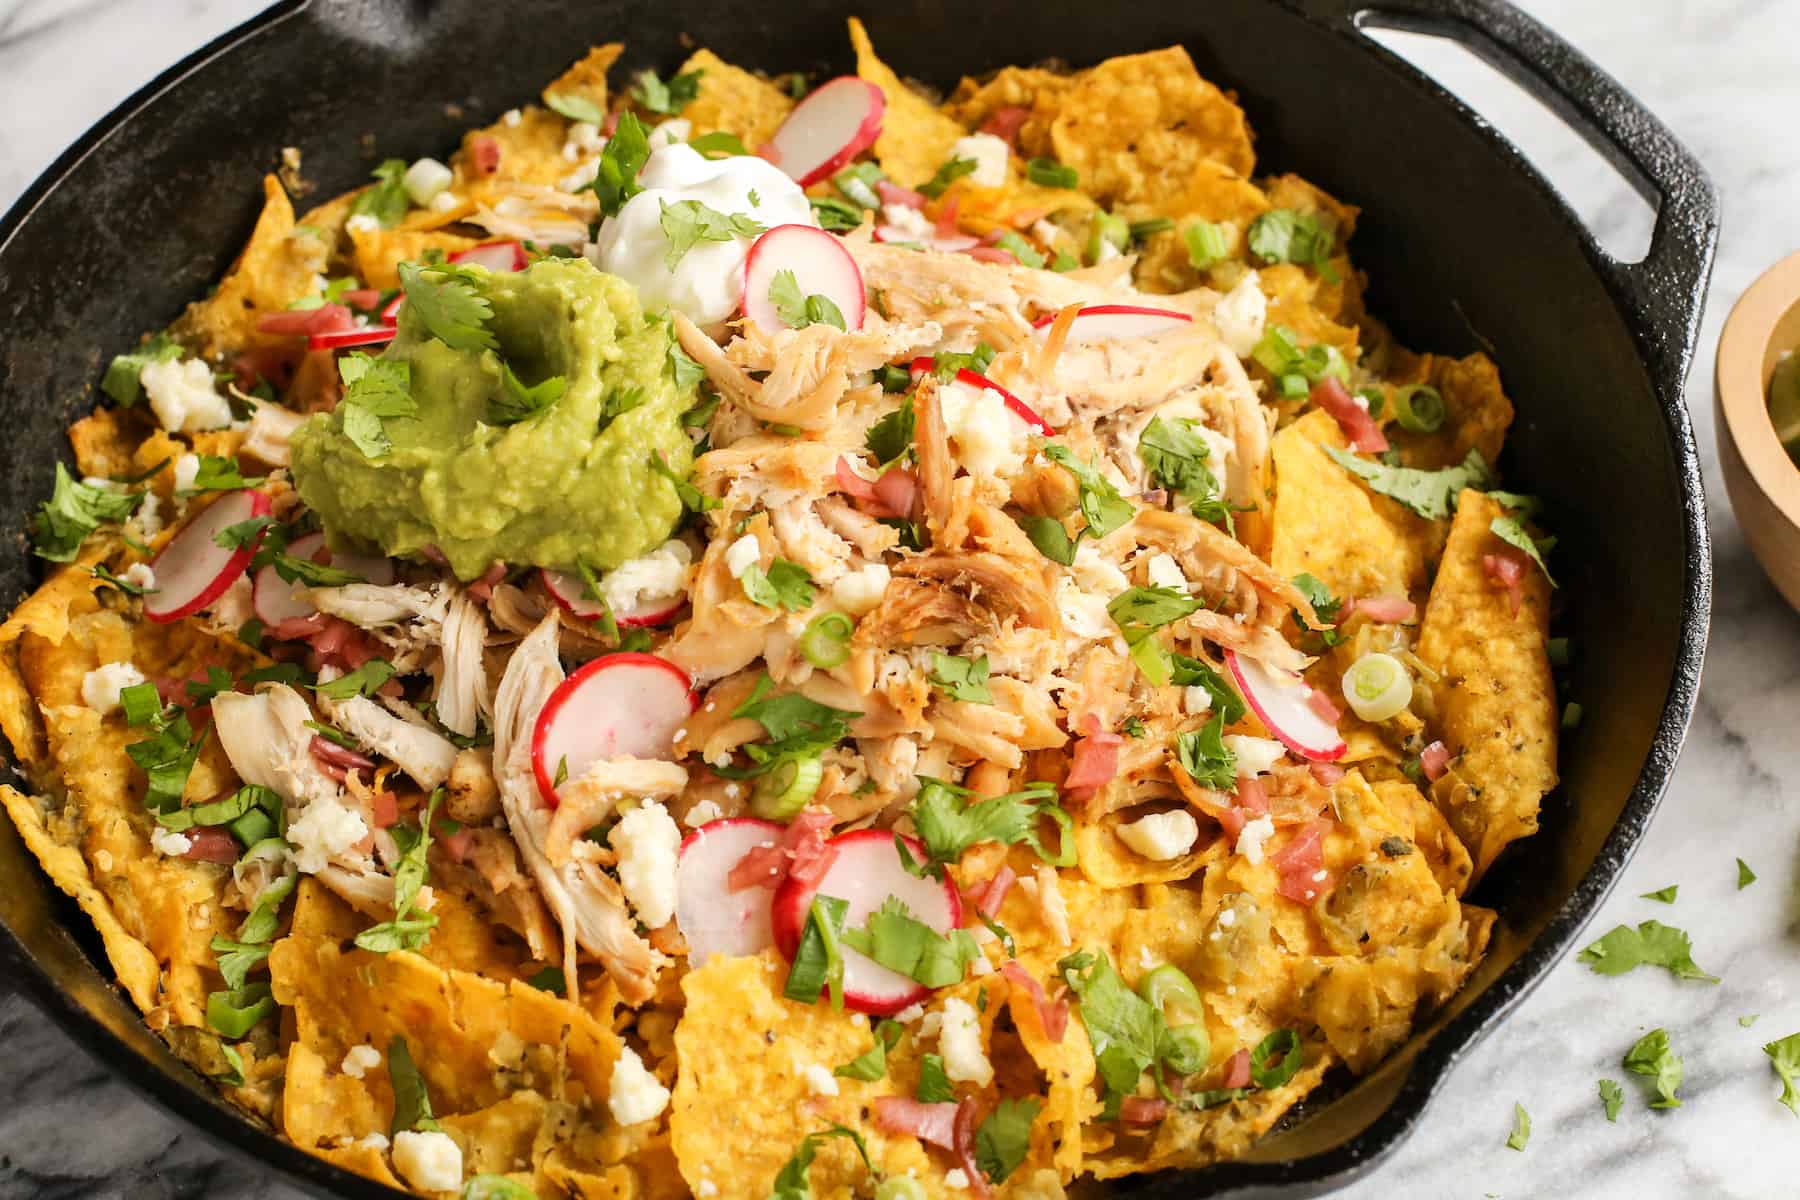 Skillet chilaquiles verdes topped with chicken and sliced radishes